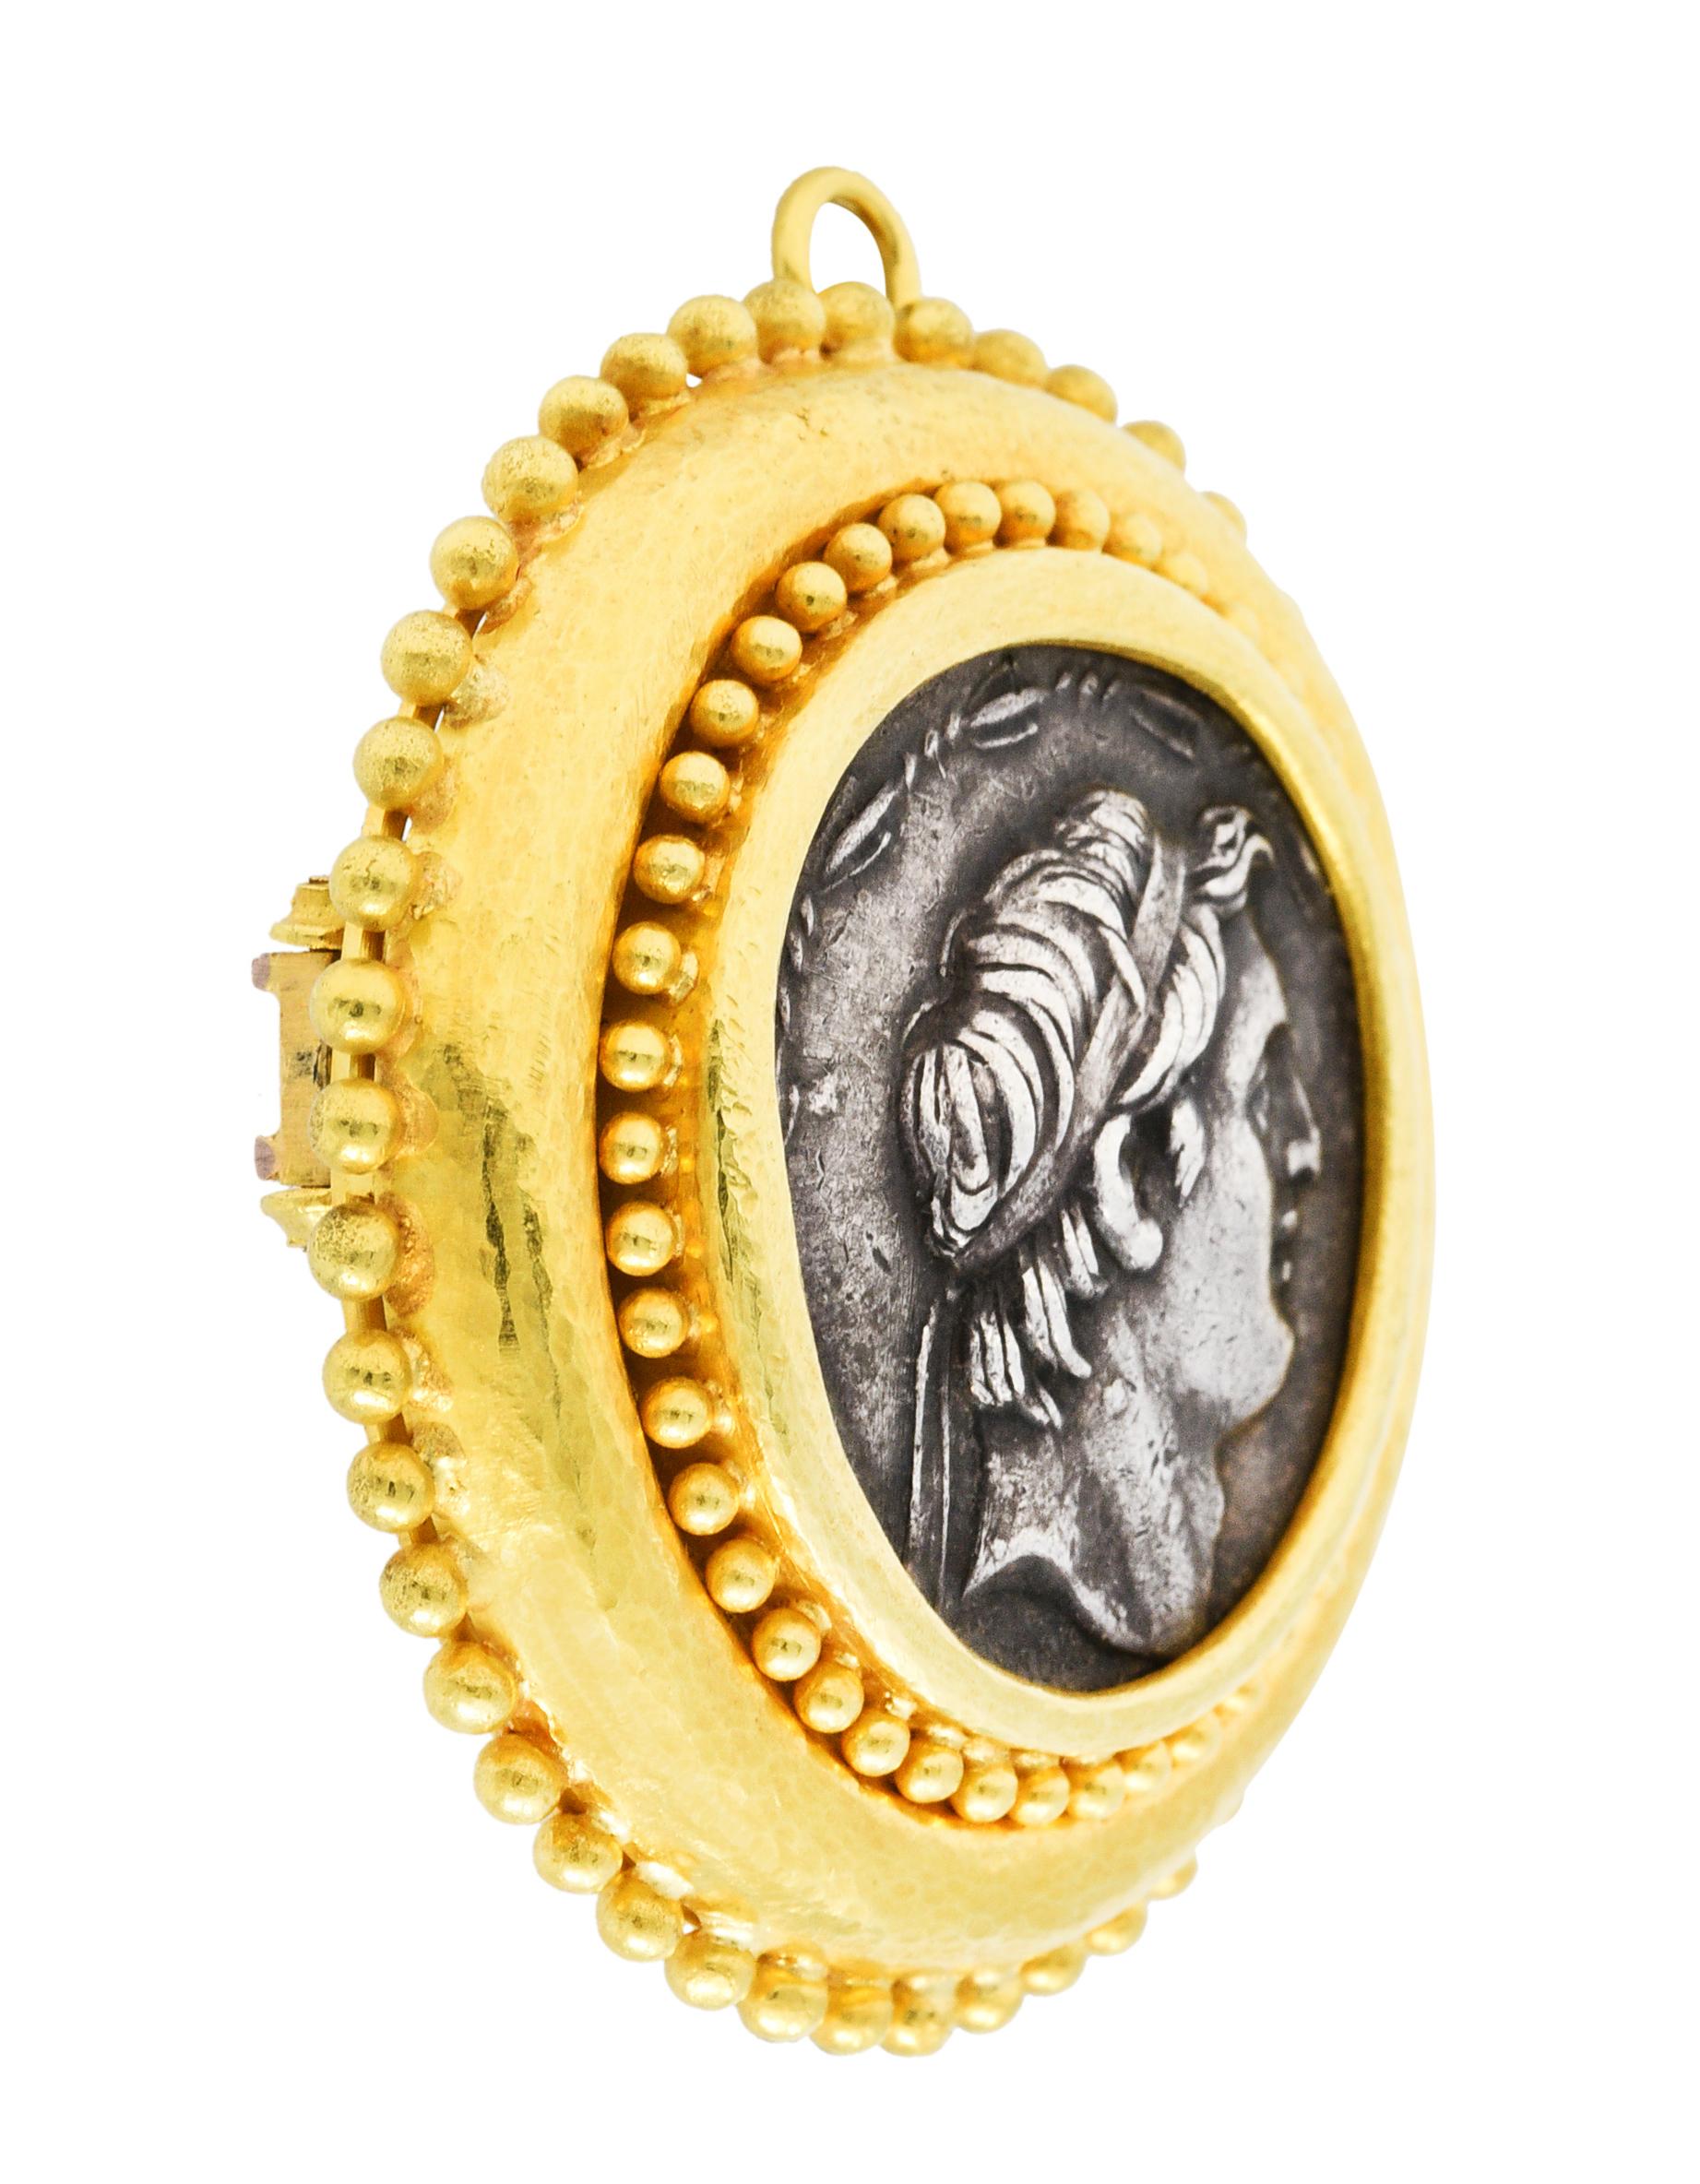 Substantial circular brooch features a silver tetradrachm coin

Front depicts the profile portrait of Demetrios I Soter of the Seleucid Empire

Back depicts Tyche, goddess of chance, seated and holding her icons - a bushel of wheat and a